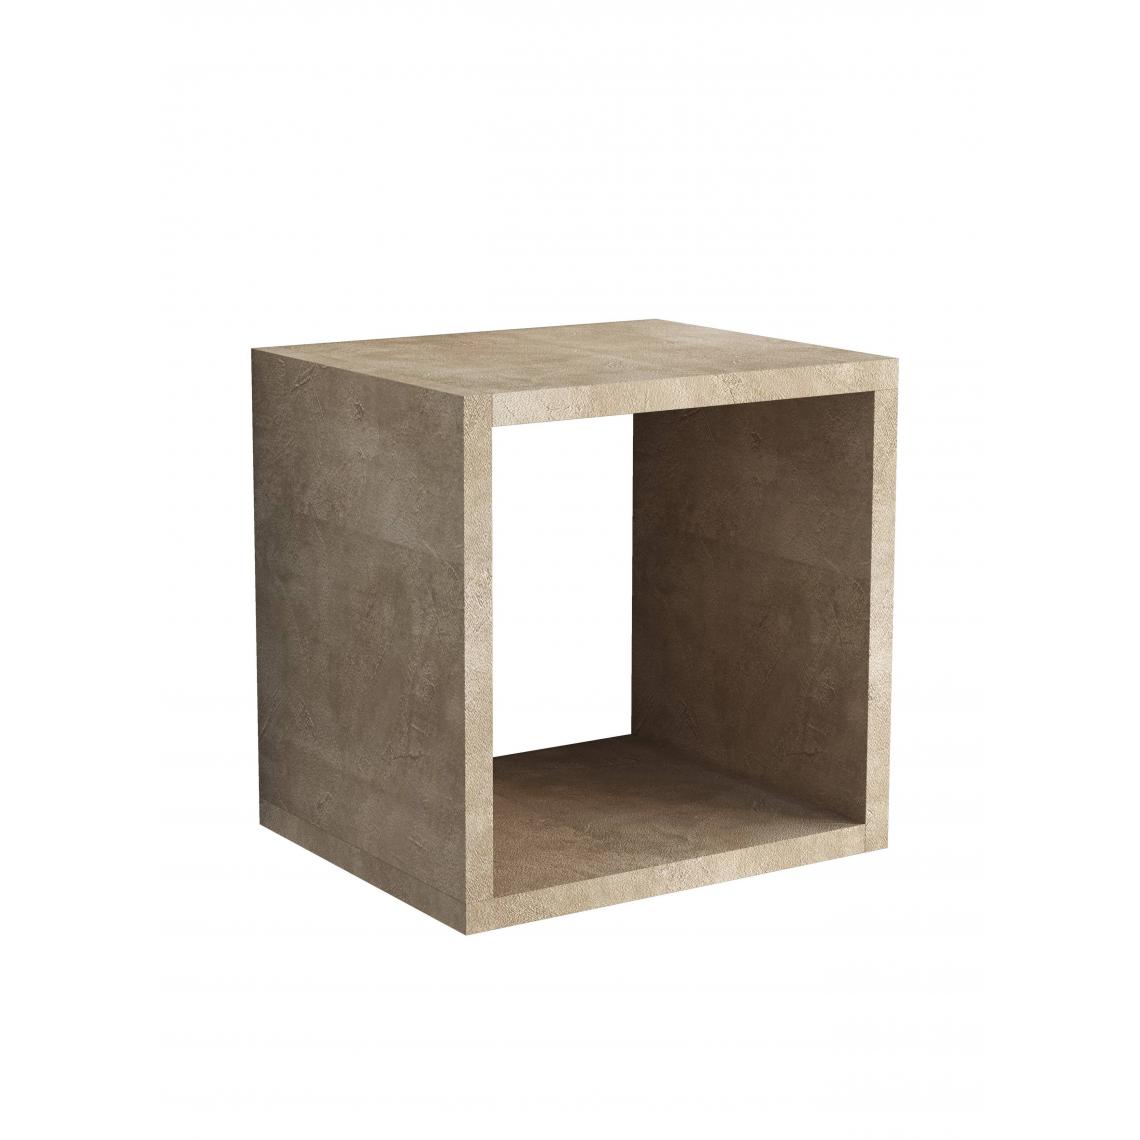 Alter - Cube de rangement modulable, 100% Made in Italy, atagère murale modulable, etagère murale, 30x25h30 cm, Couleur Rouille - Etagères